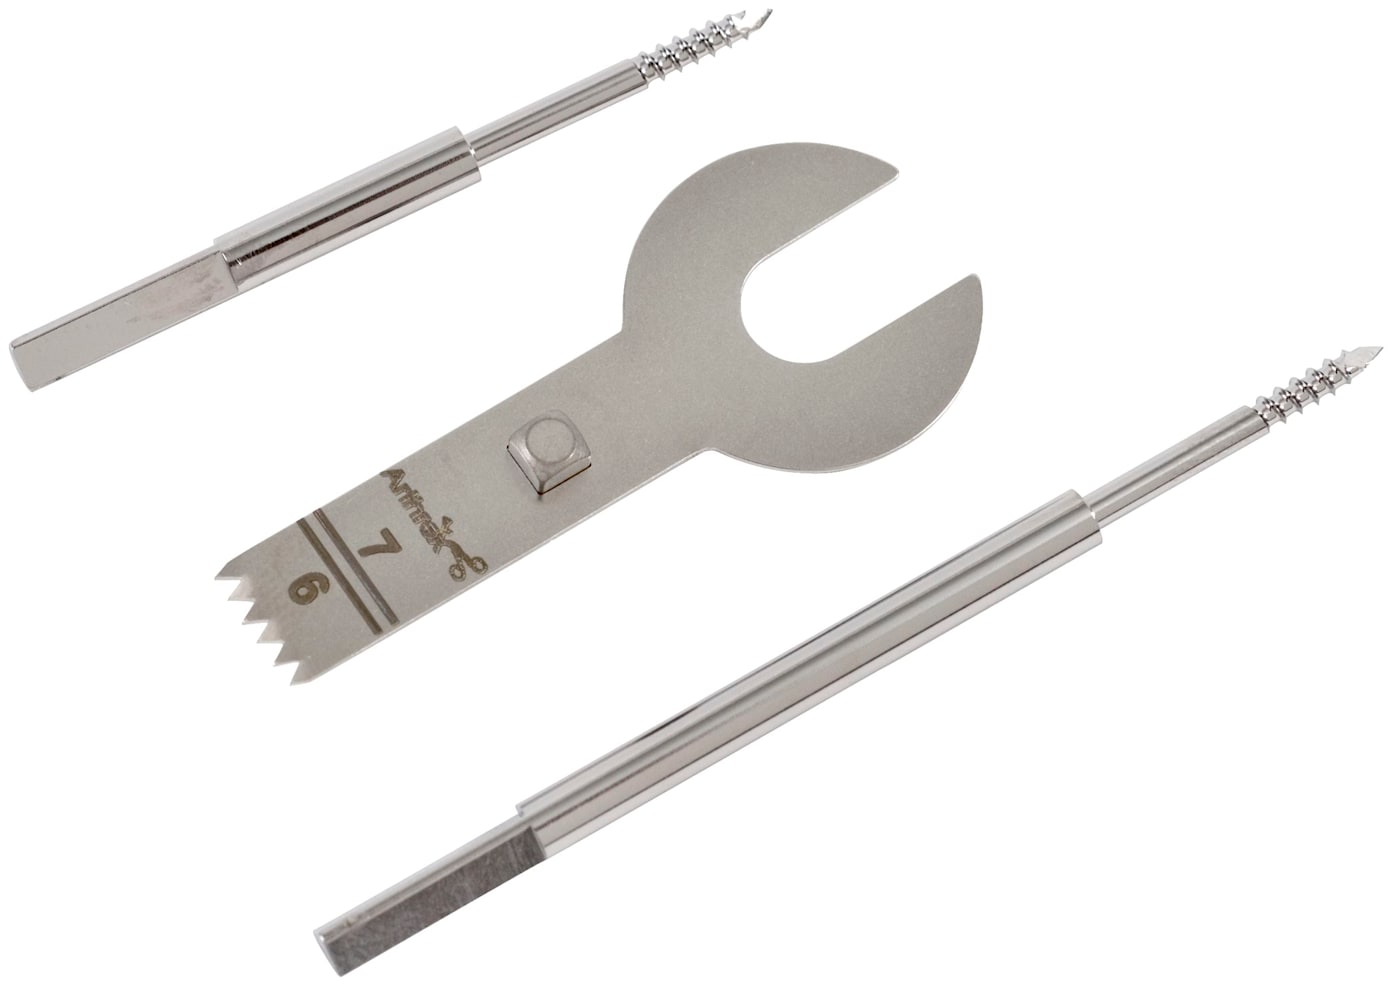 Graft Harvesting Kit w/Hall Style Sagittal Saw Blade w/7 mm depth stop and 2 ea. threaded fixation pins, short &amp; long